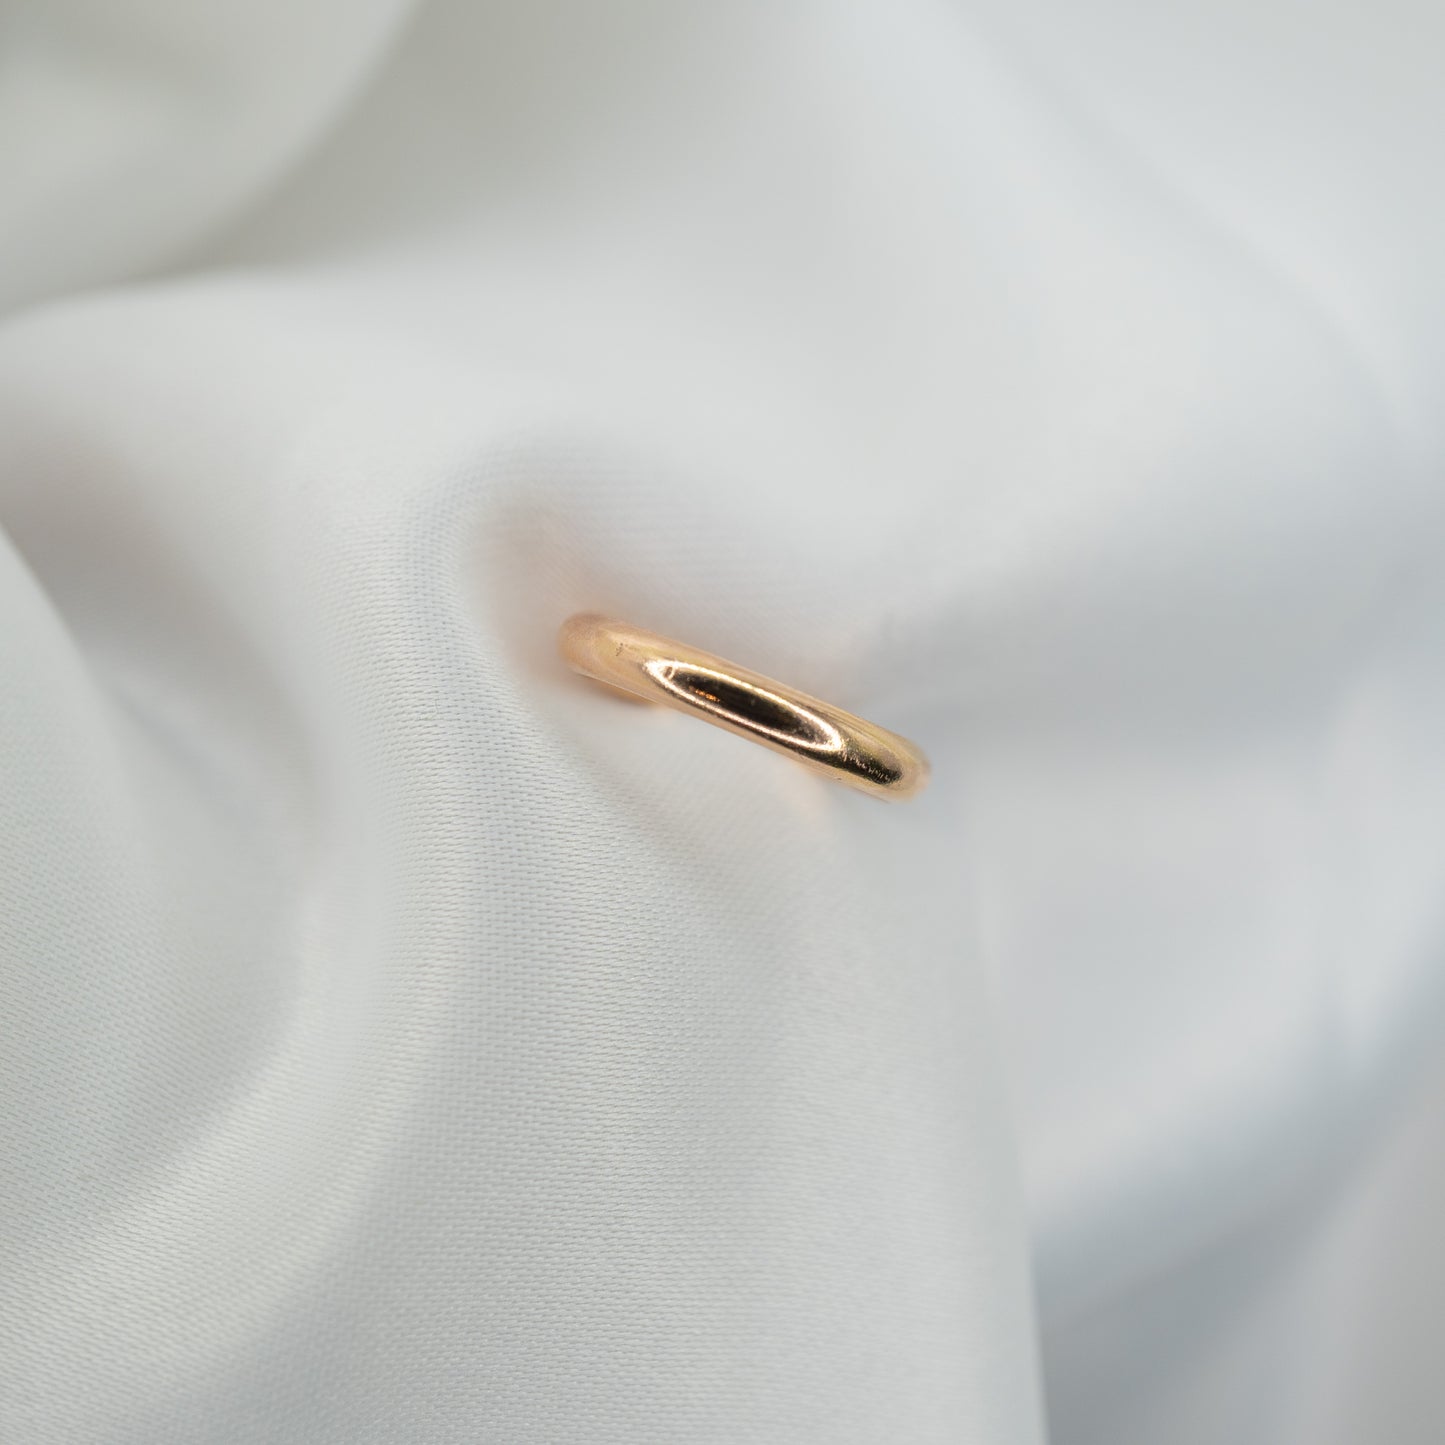 Gold Filled Plain Band Ring - shot on white - aerial view